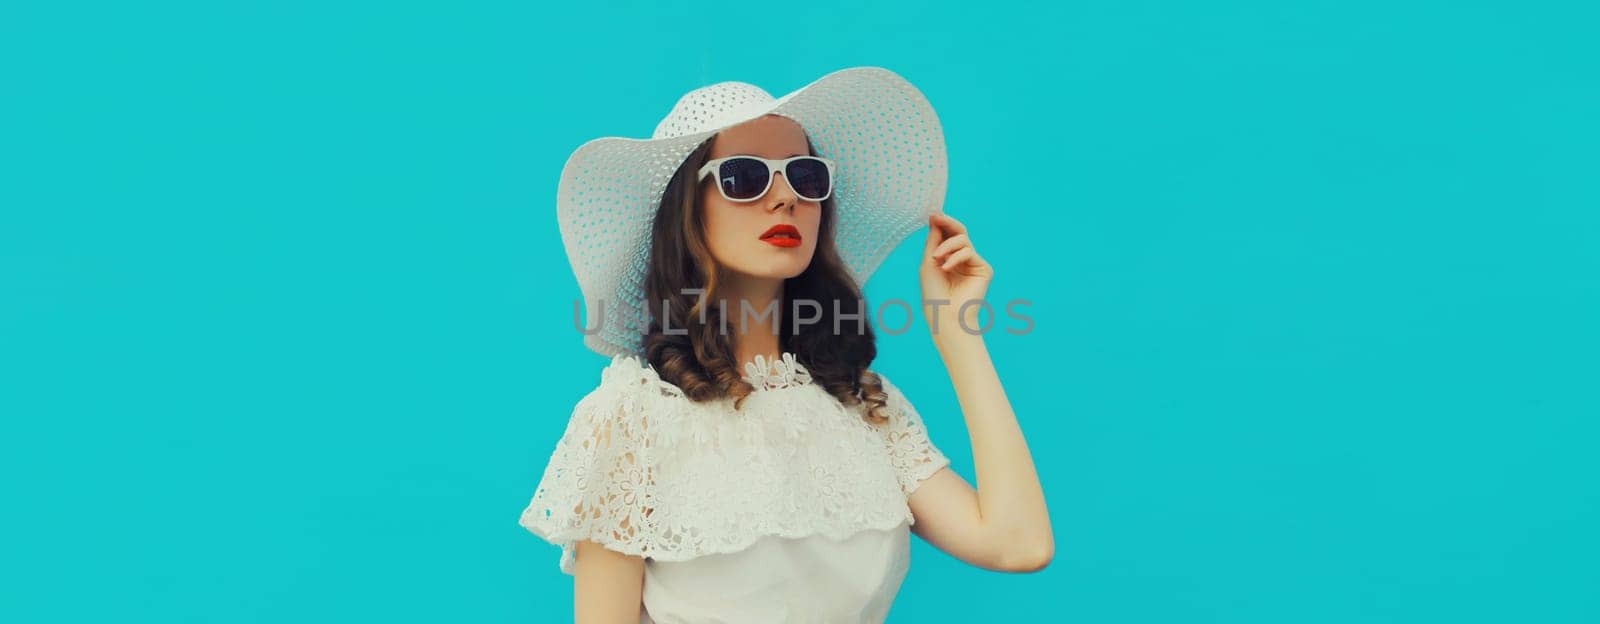 Beautiful caucasian young woman model posing wearing white summer straw hat on blue background by Rohappy